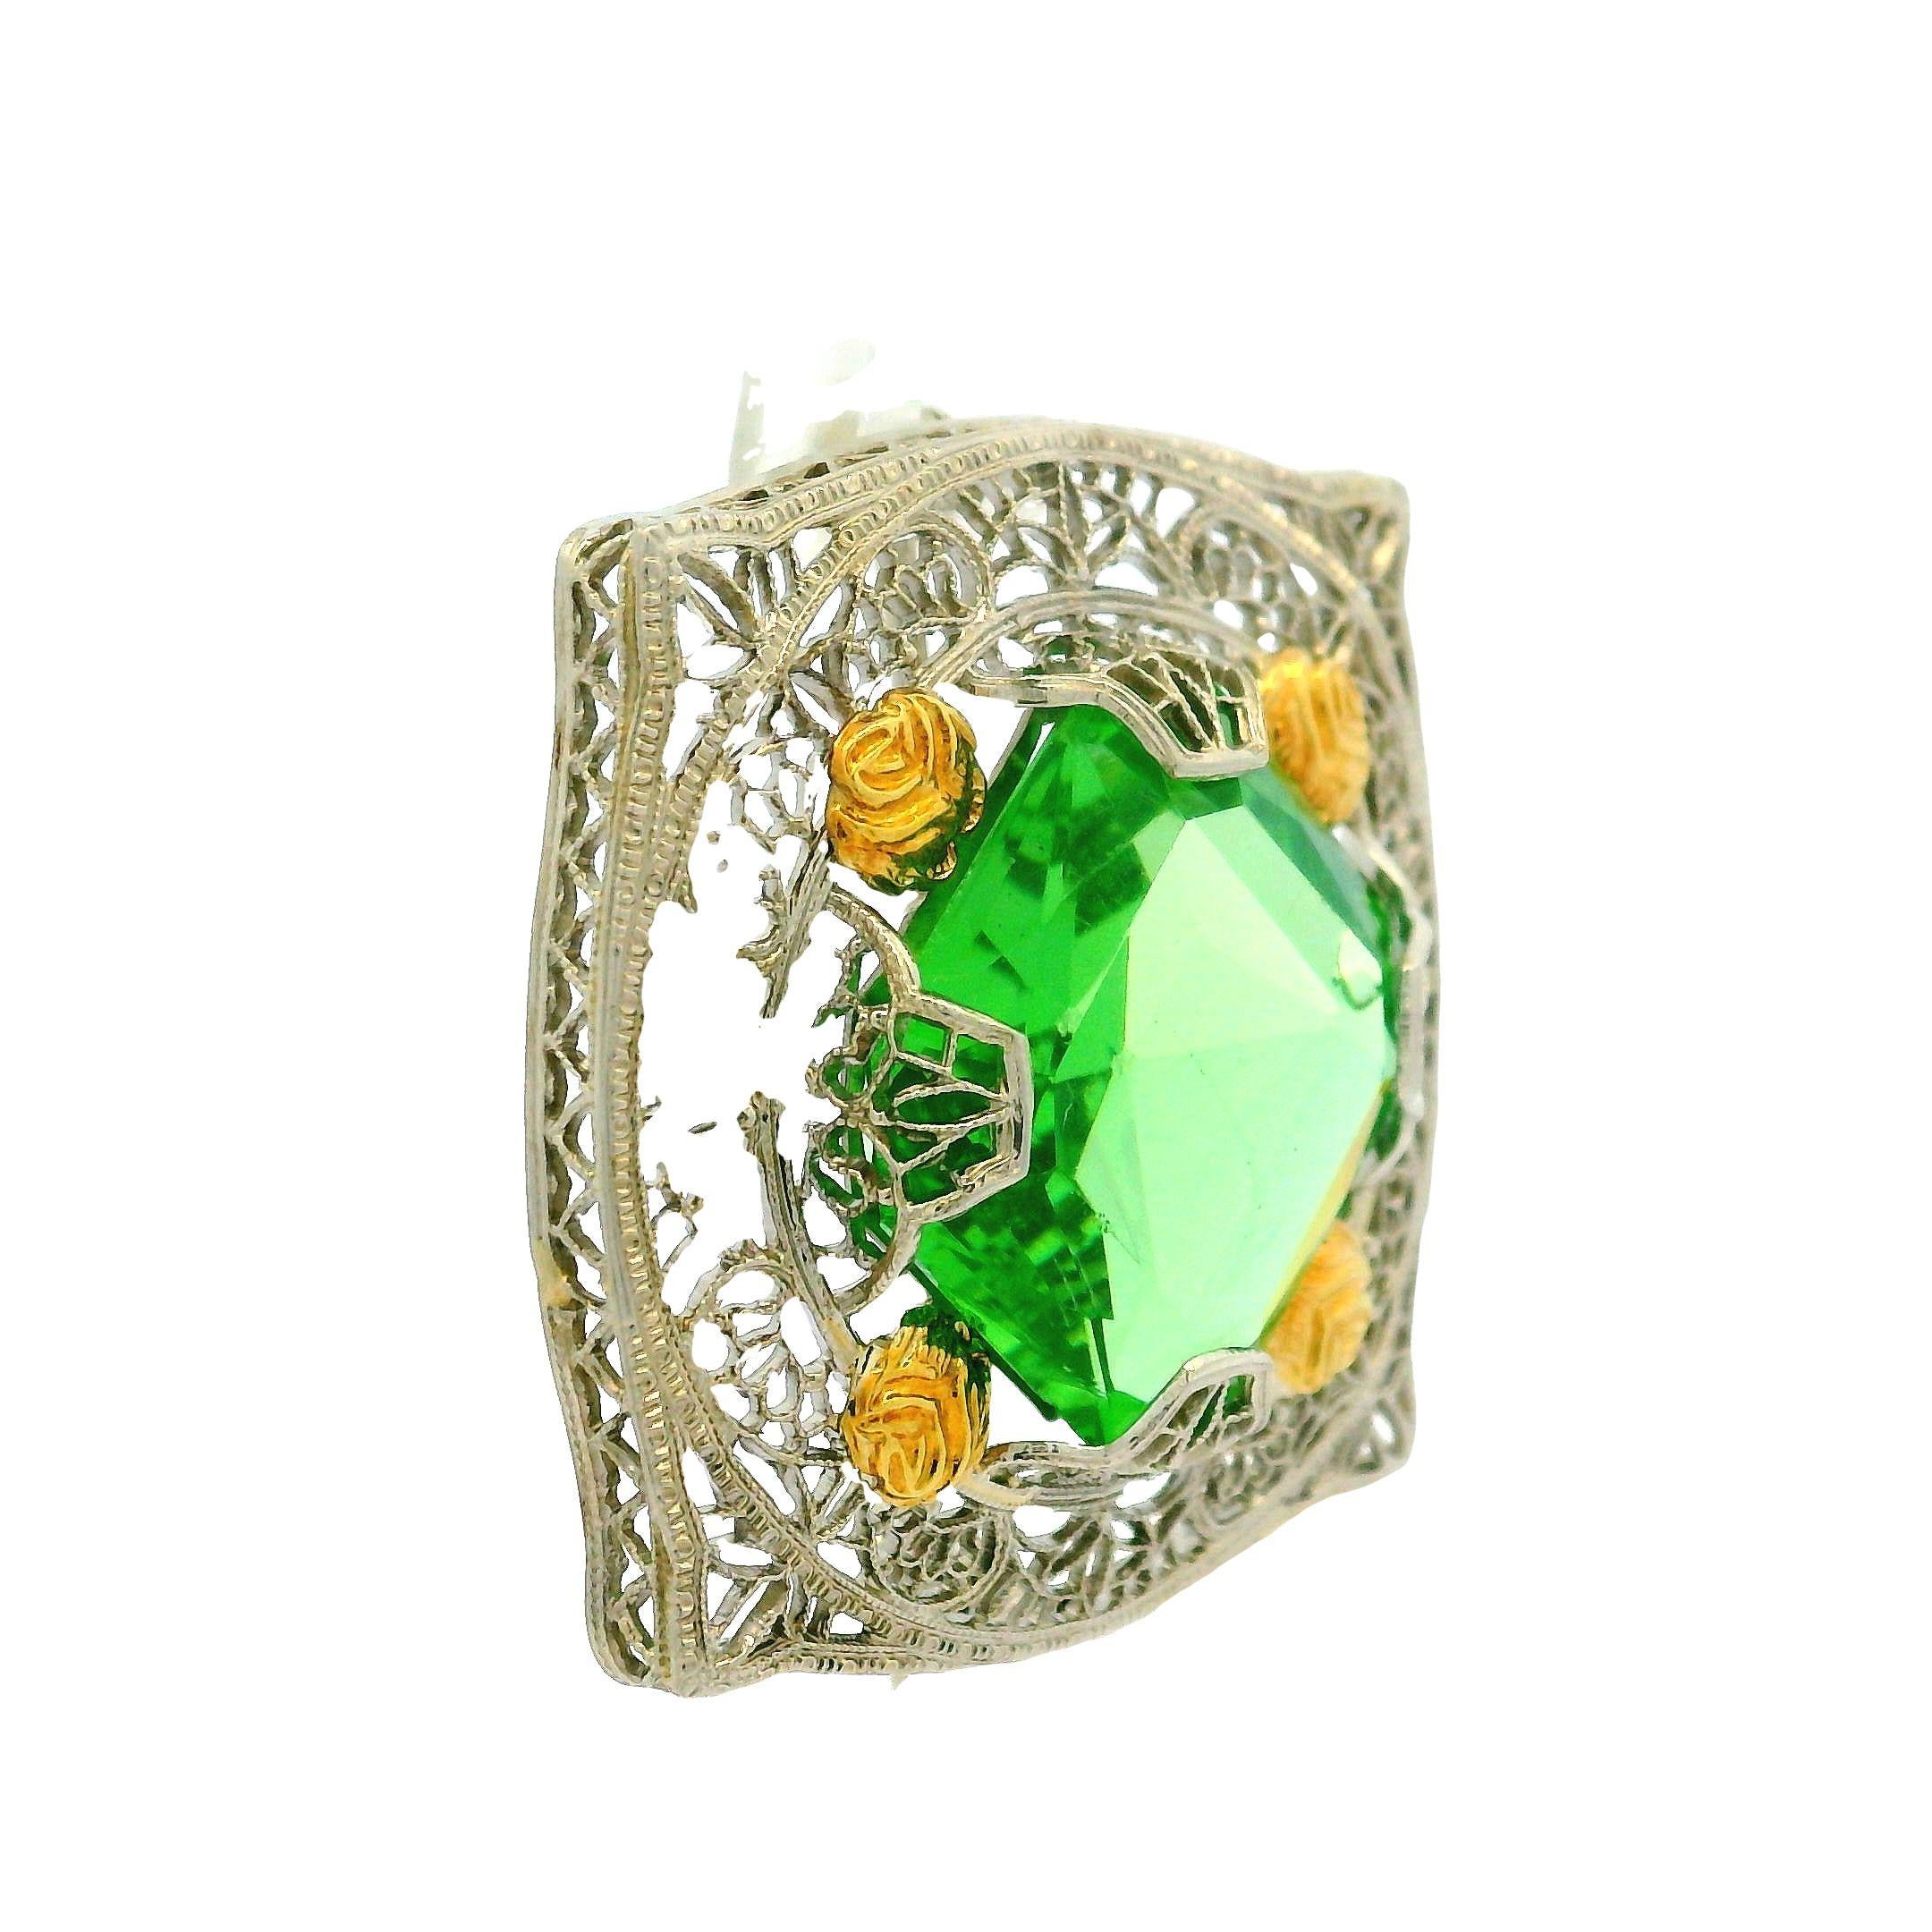 Antique Art Deco 10k White Gold Lab Grown Green Stone Filigree Brooch Pin In Excellent Condition For Sale In Montclair, NJ